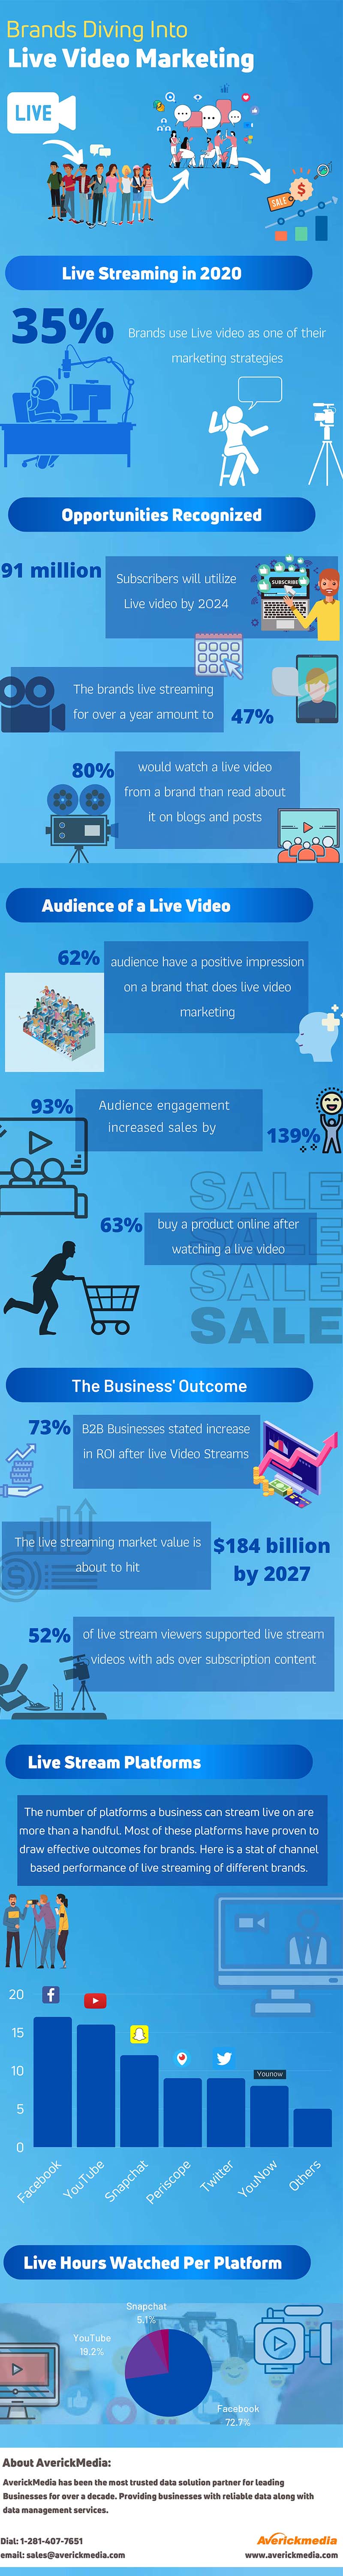 infographic-businesses-diving-into-live-video-marketing